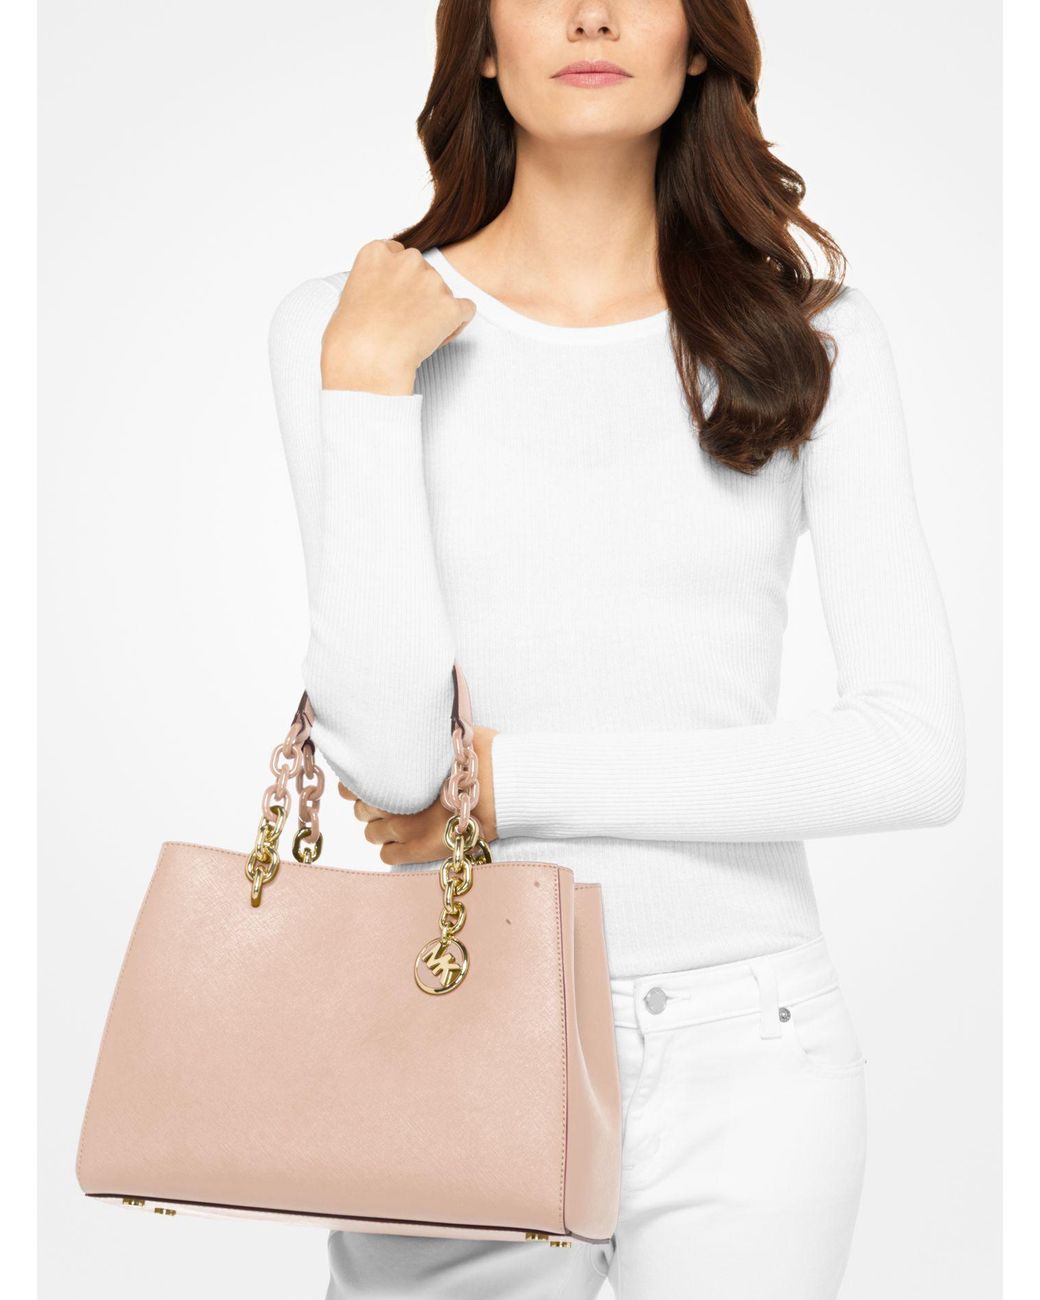 Michael Kors Cynthia Saffiano Leather Satchel in Pink | Lyst